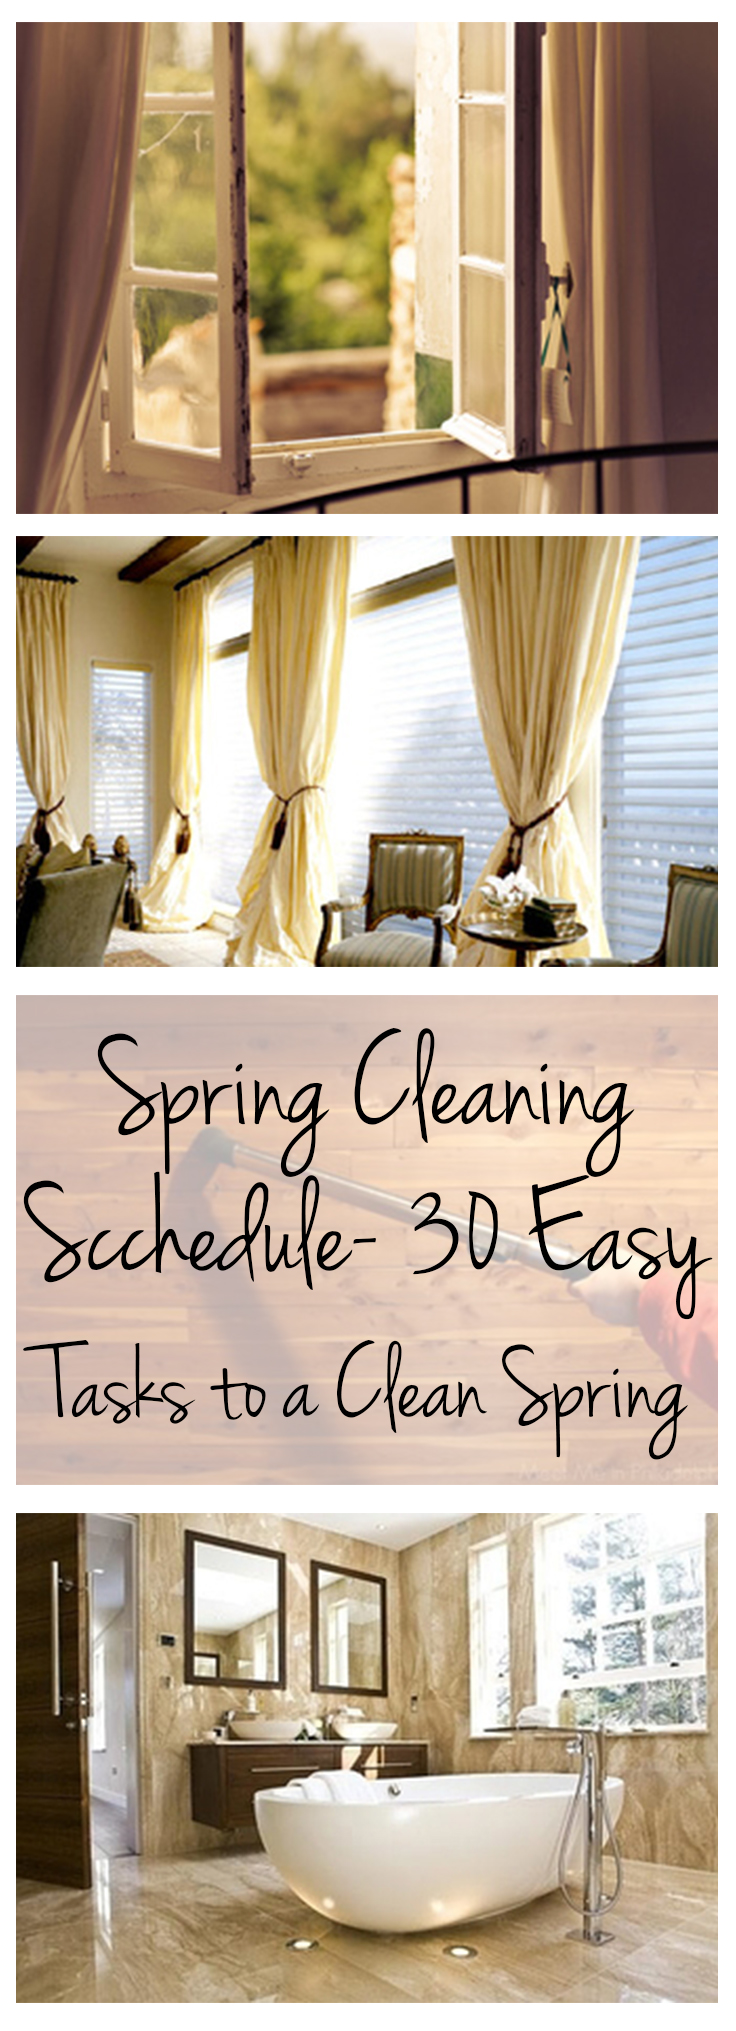 Spring Cleaning Scchedule- 30 Easy Tasks to a Clean Spring (1)